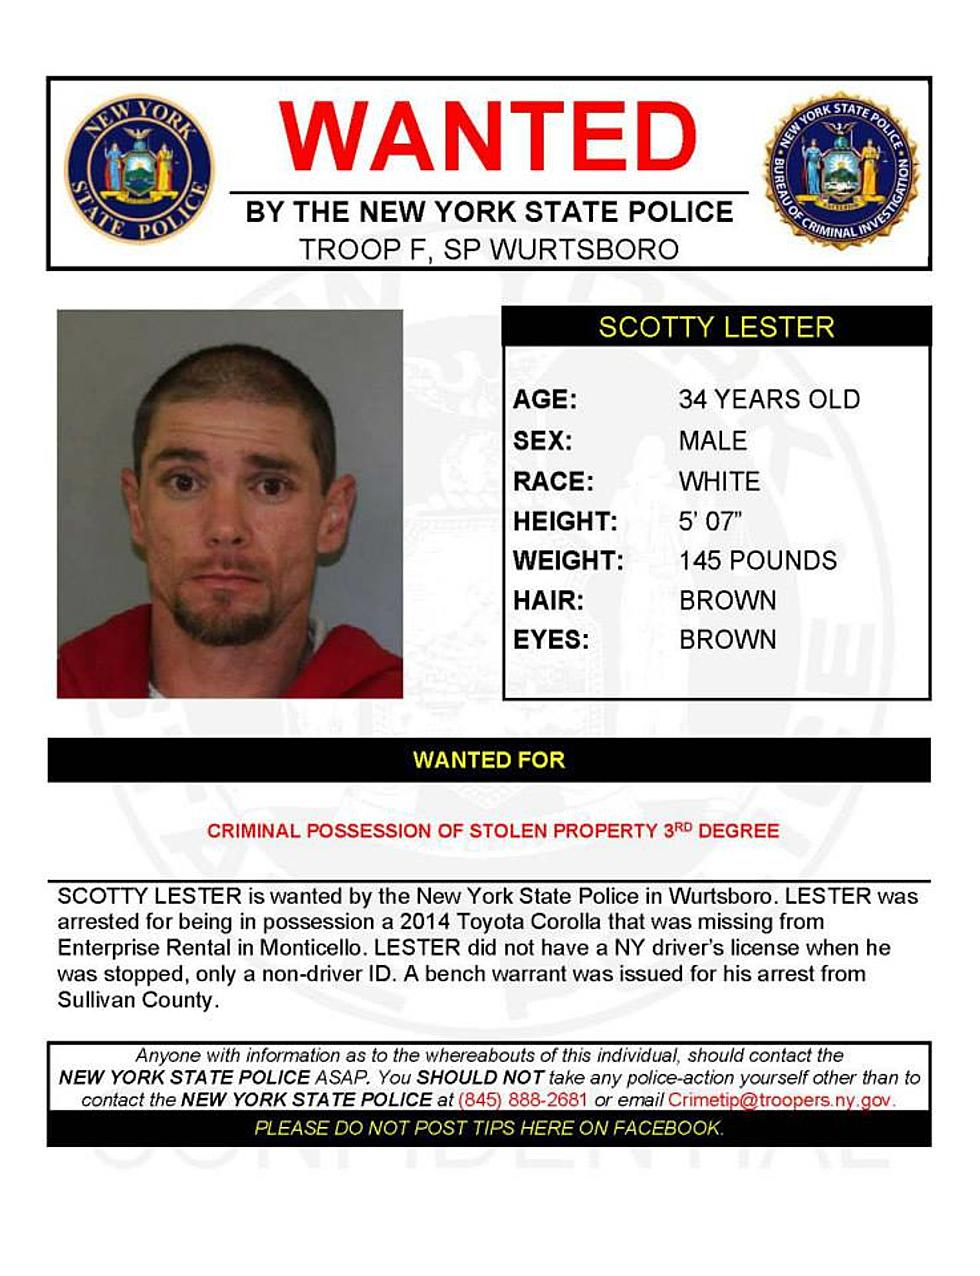 Warrant Wednesday: Wurtsboro Man Wanted by New York State Police